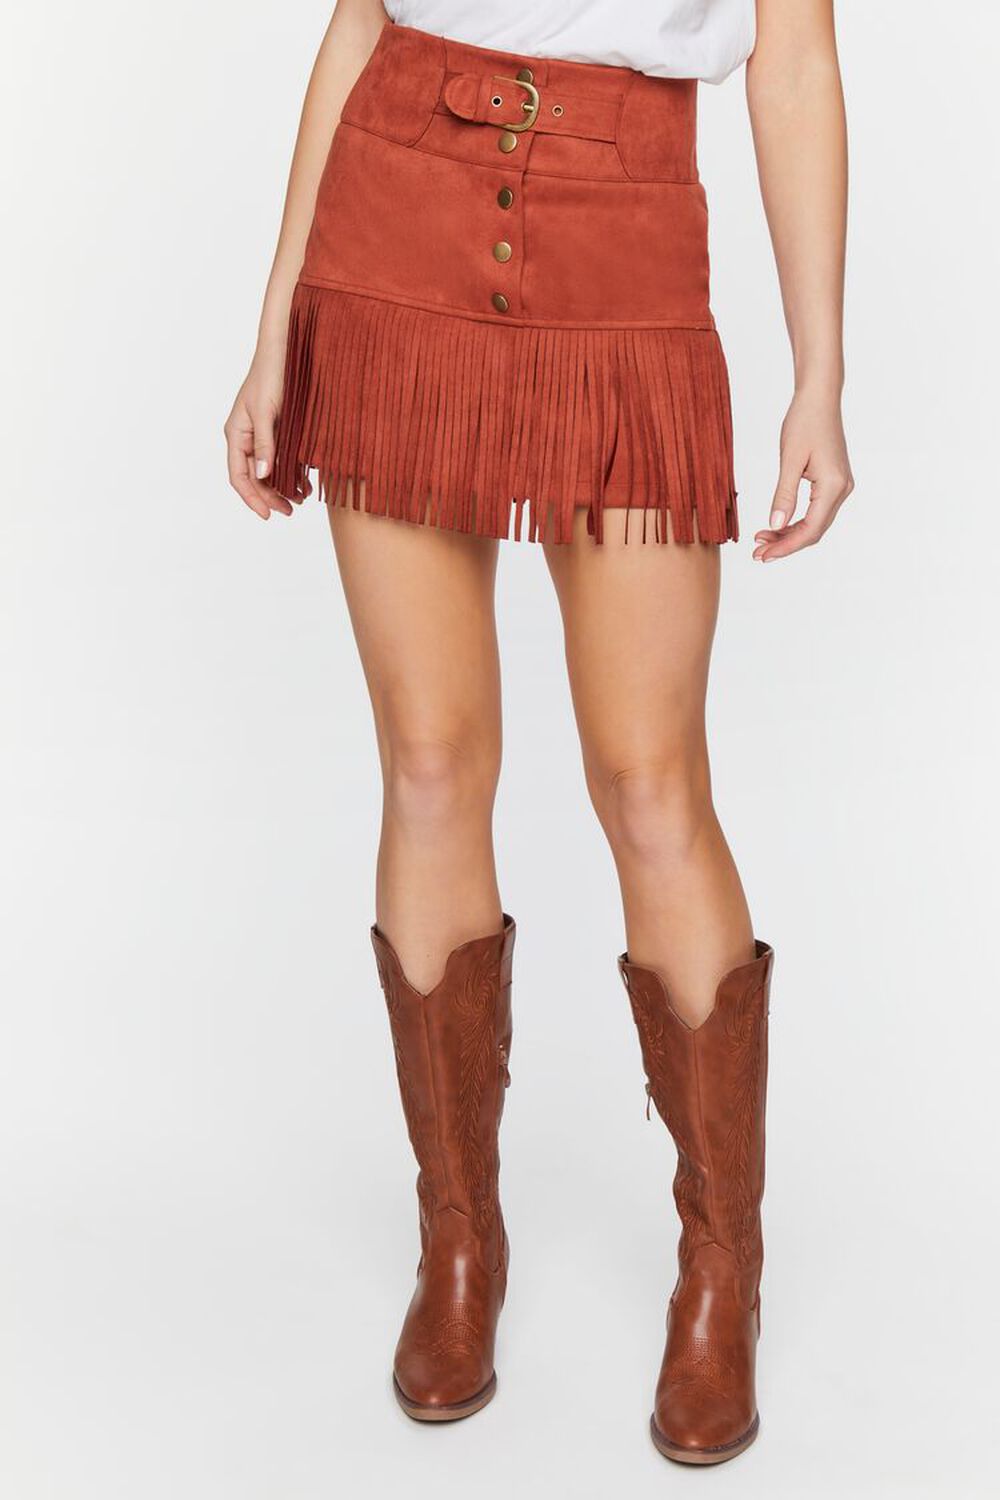 BROWN Belted Faux Suede Fringe Mini Skirt, image 2